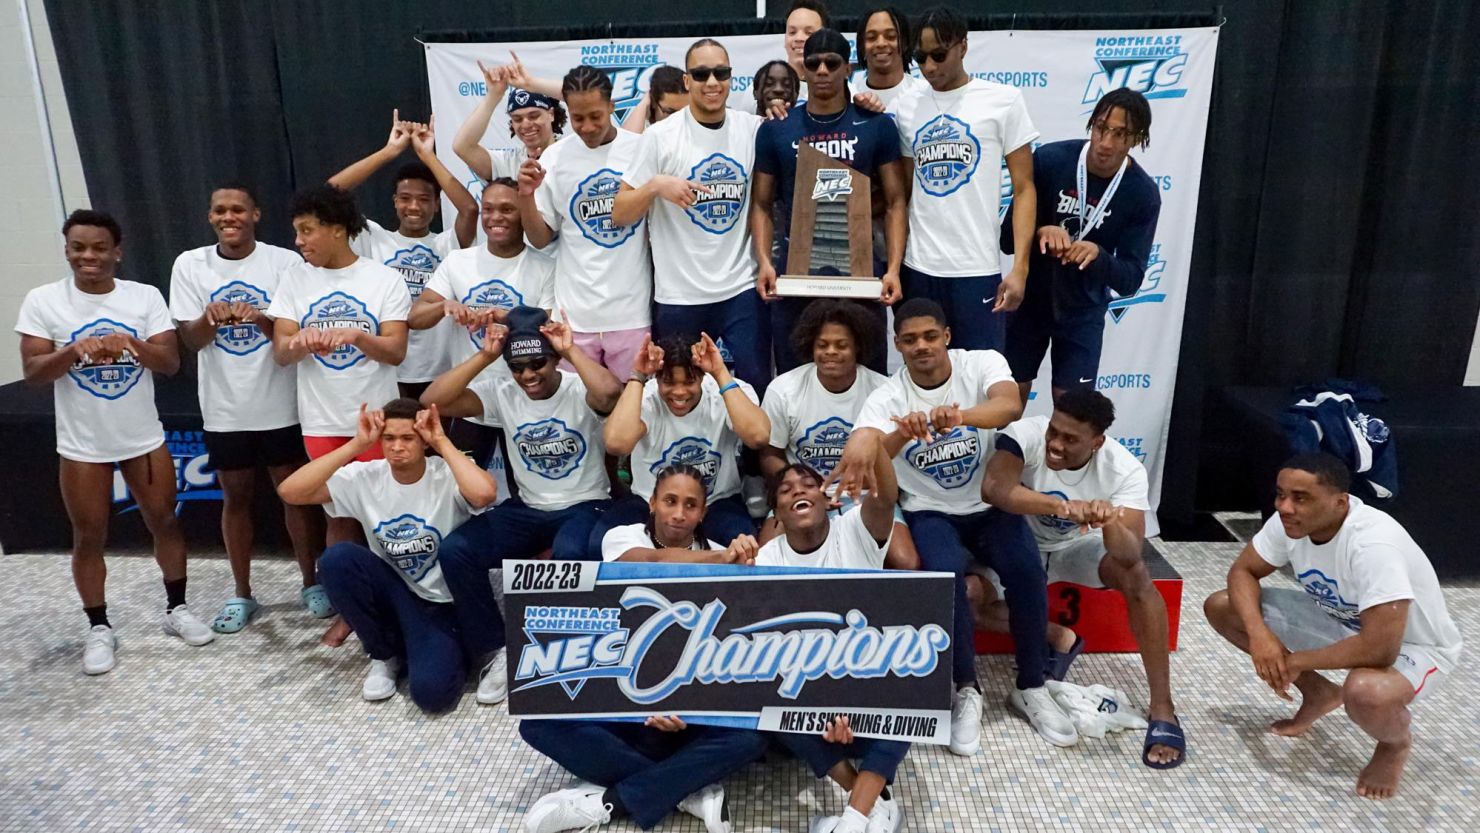 Howard University's men's swimming and diving team celebrates winning the Northeast Conference Championship.